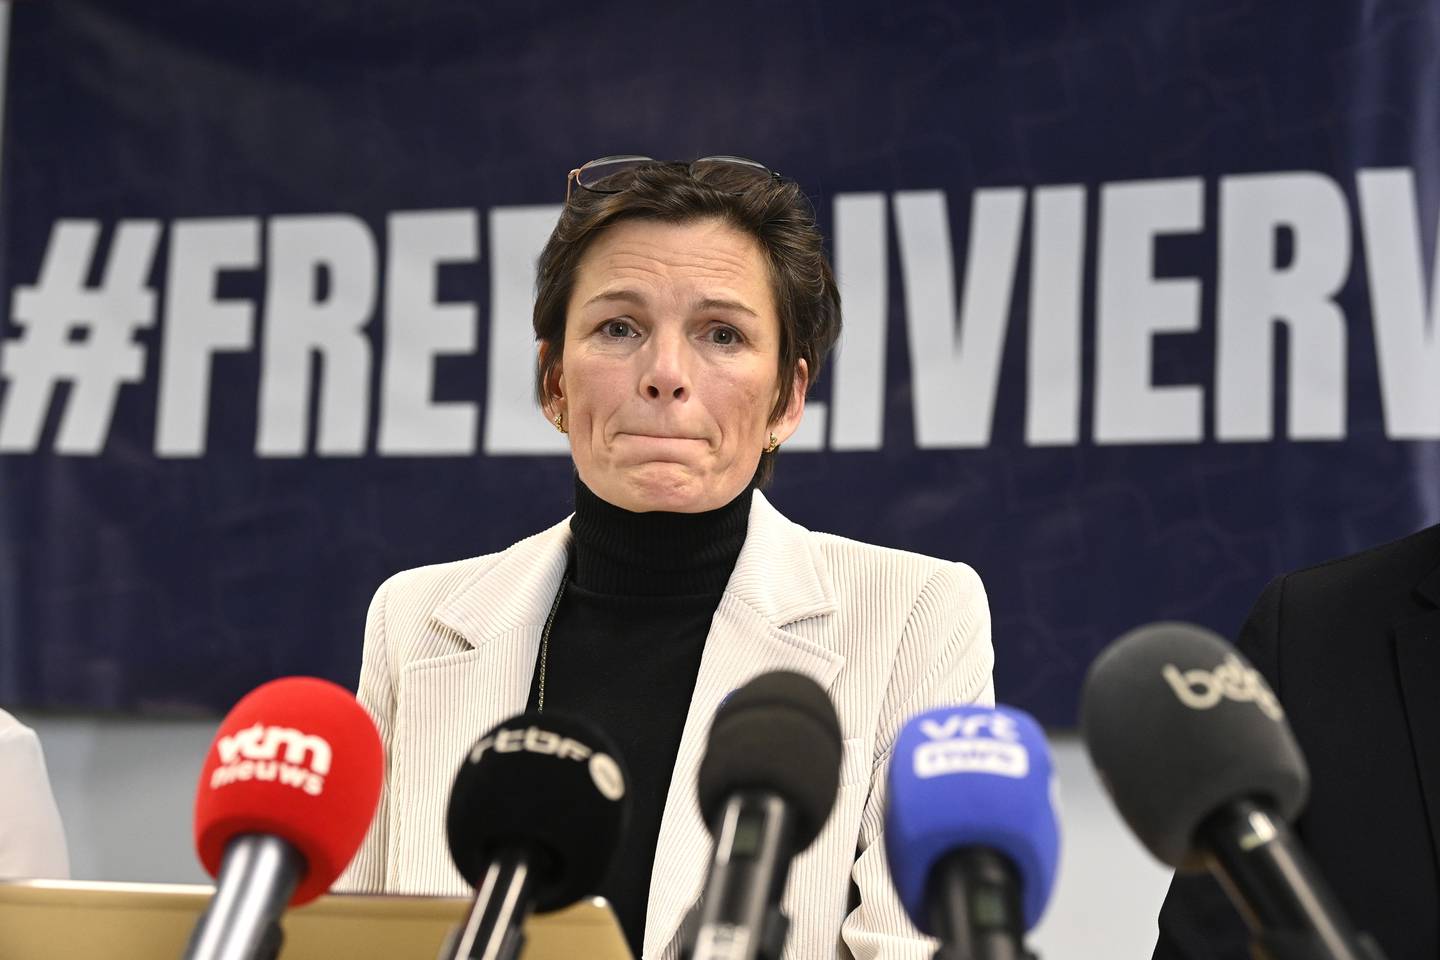 Nathalie Vandecasteele sobbed as she gave Belgian MPs details of her brother’s plight. Photonews via Getty Images